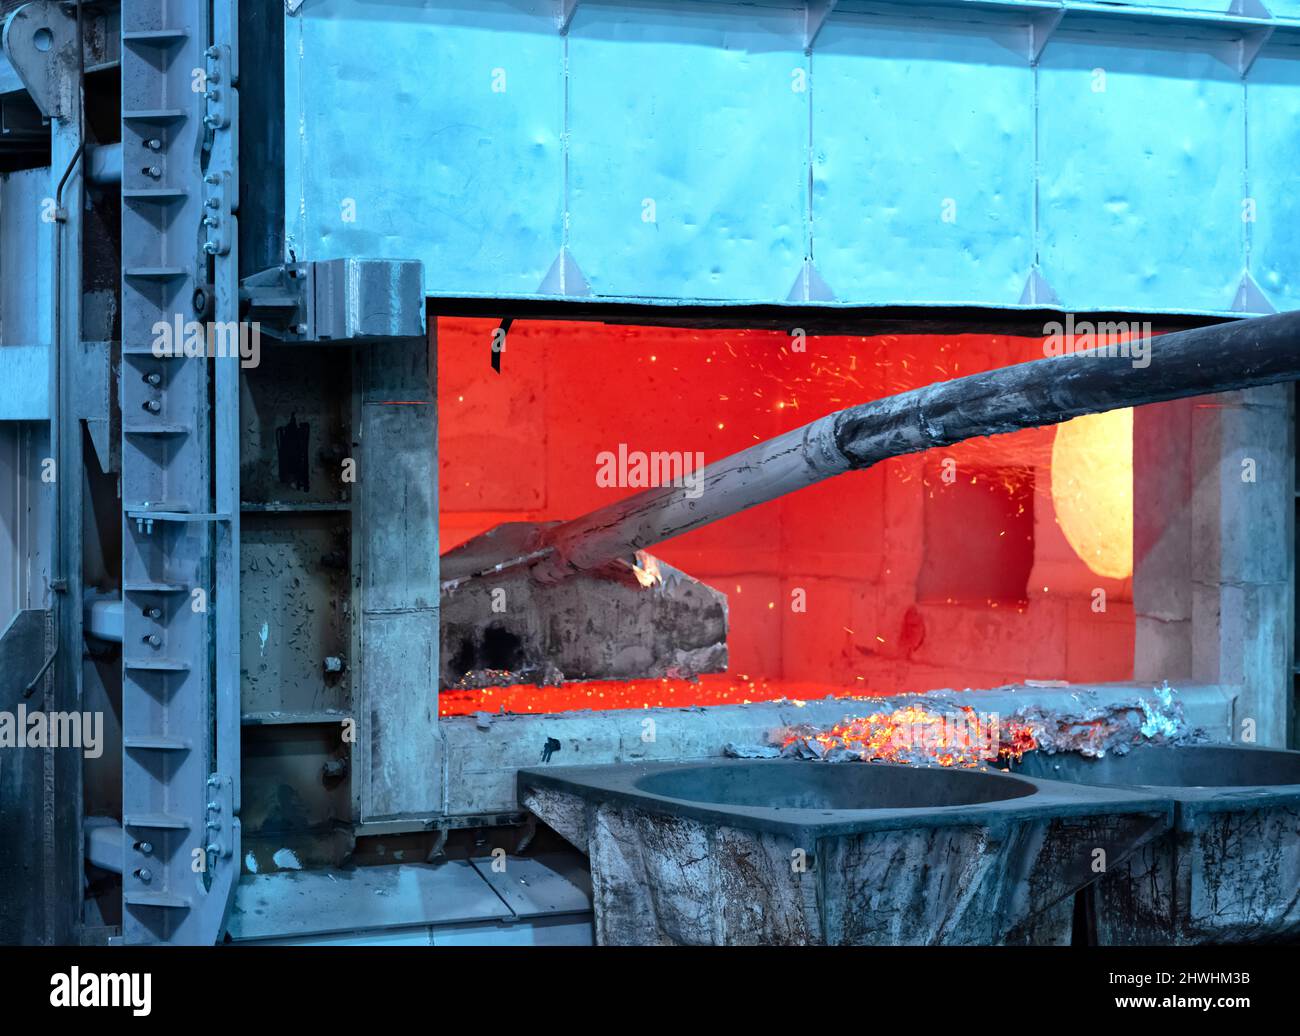 skimming melted aluminum for removing the dross before casting. Aluminum foundry works showing an open furnace Stock Photo